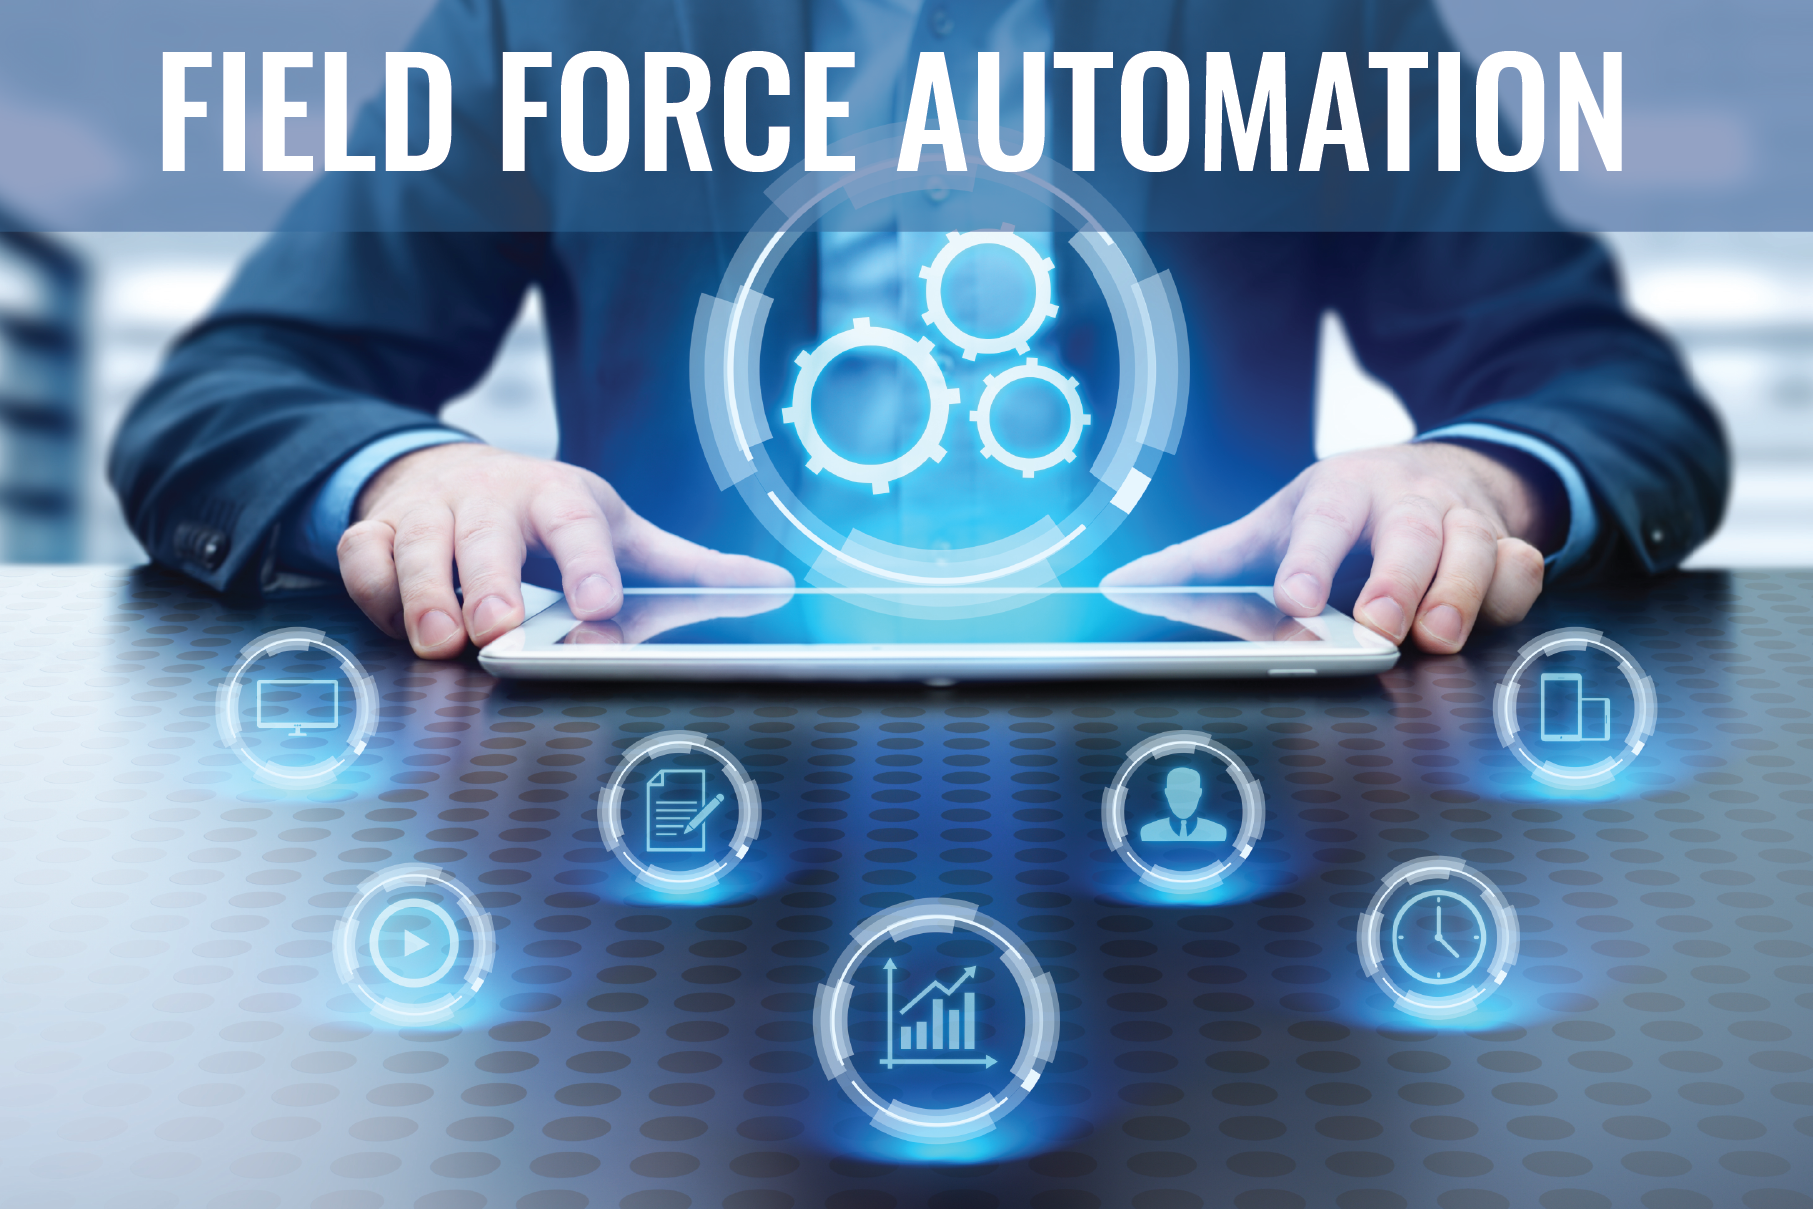 Top 6 Field Force Automation Trends You Must Follow in 2022 to Tower Your Service Management Business